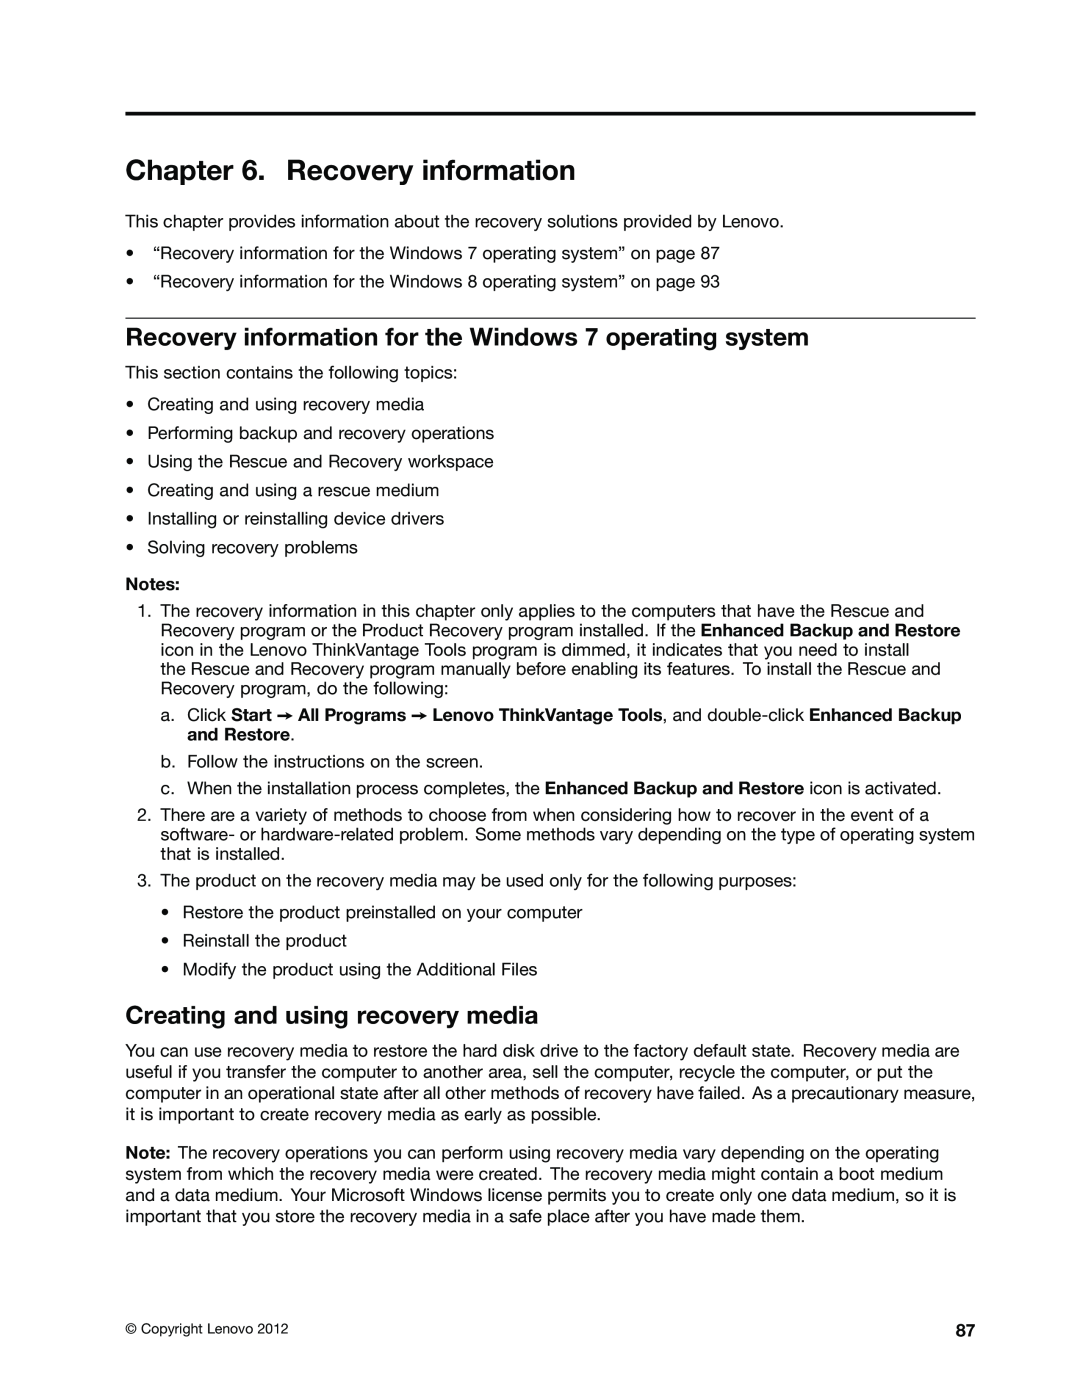 Lenovo 3198, 2988, 2992E5U Recovery information for the Windows 7 operating system, Creating and using recovery media 